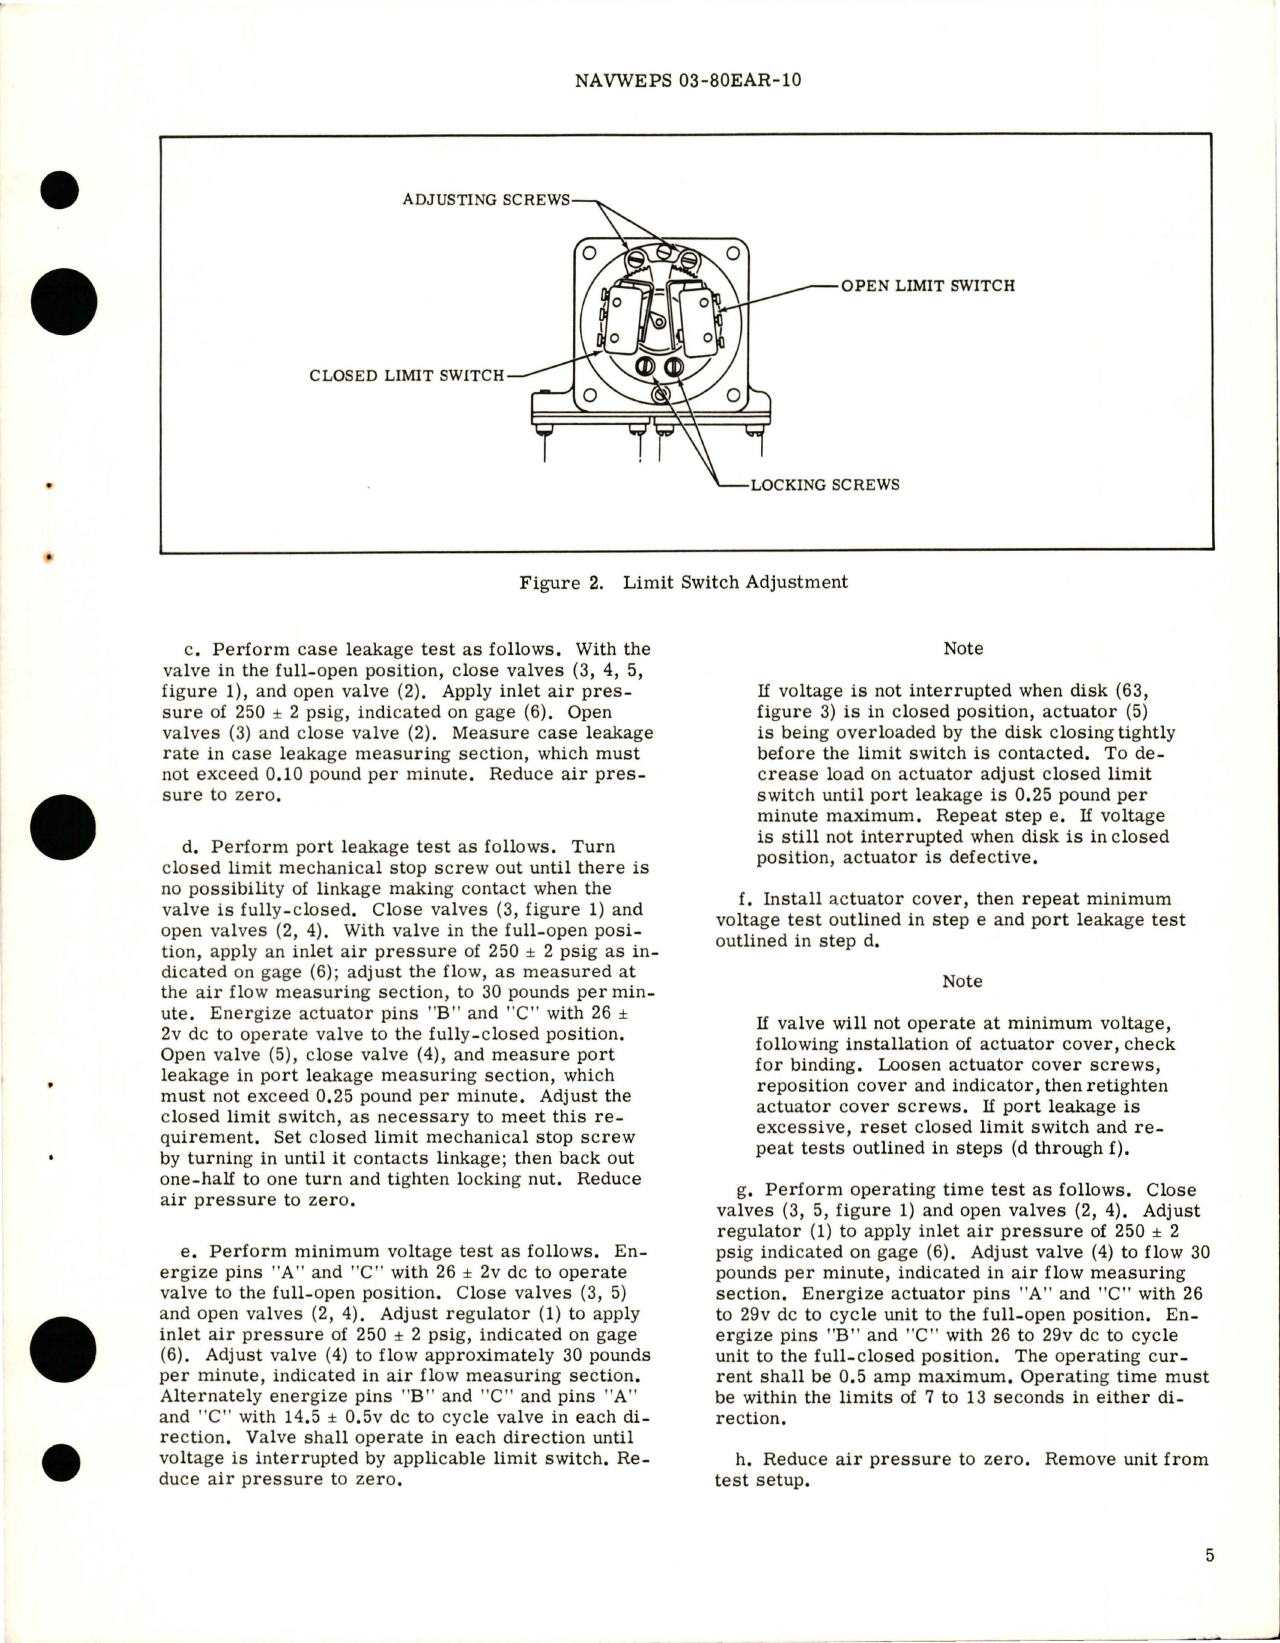 Sample page 7 from AirCorps Library document: Overhaul Instructions with Parts Breakdown for One and One-Half Inch Diameter Electric Shutoff Butterfly Valve - Part 104650